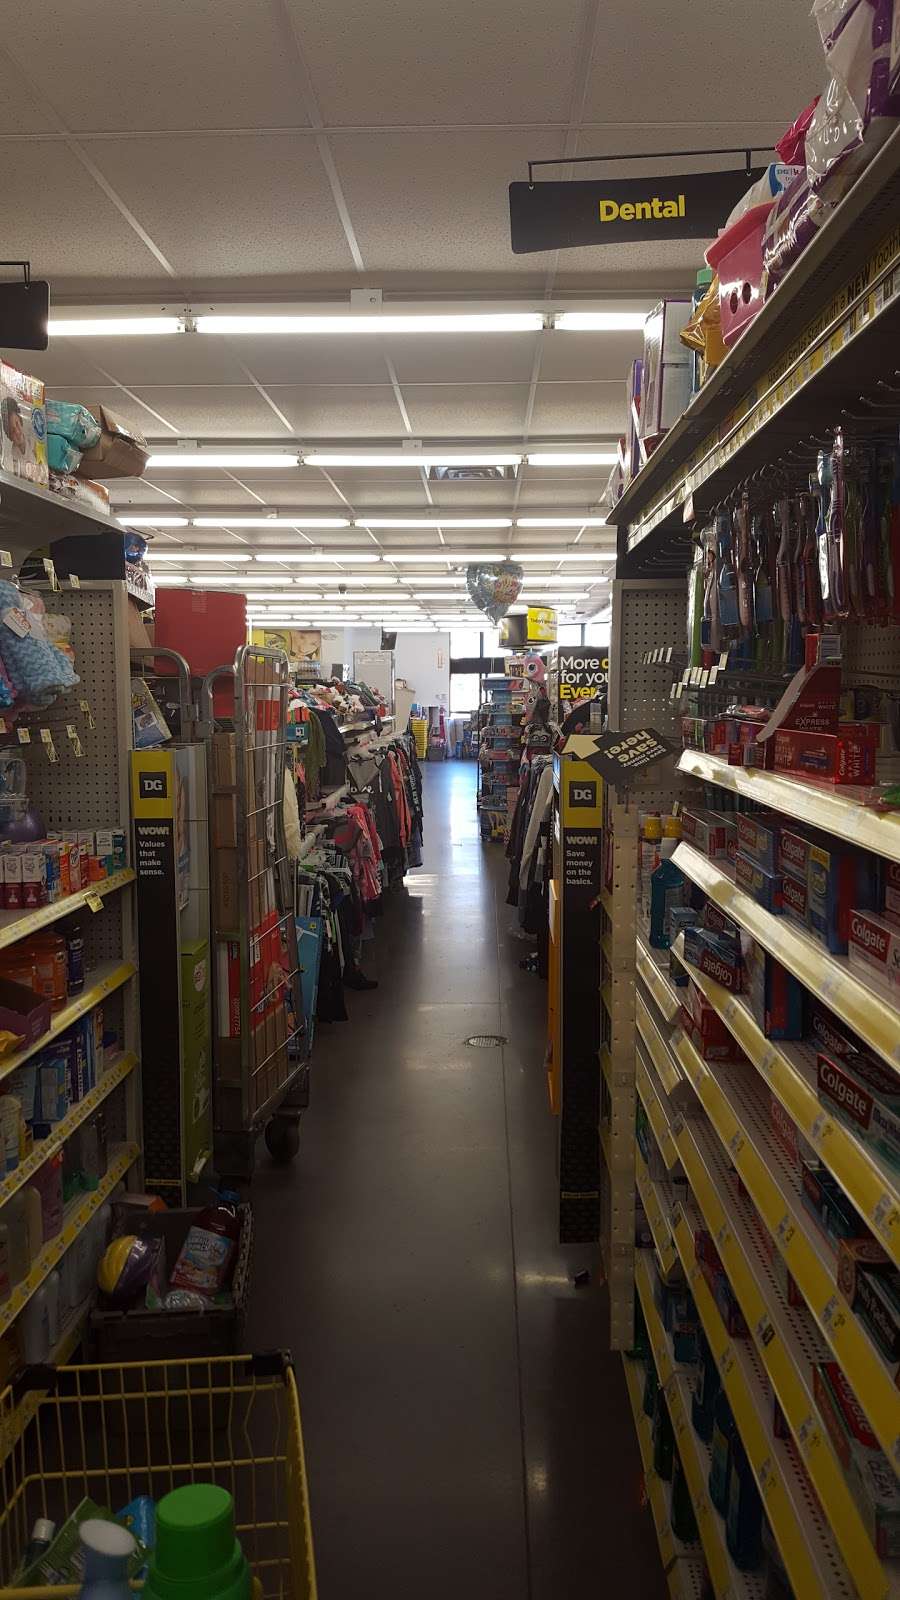 Dollar General | 10601 East 23rd St S, Independence, MO 64052, USA | Phone: (816) 533-6737